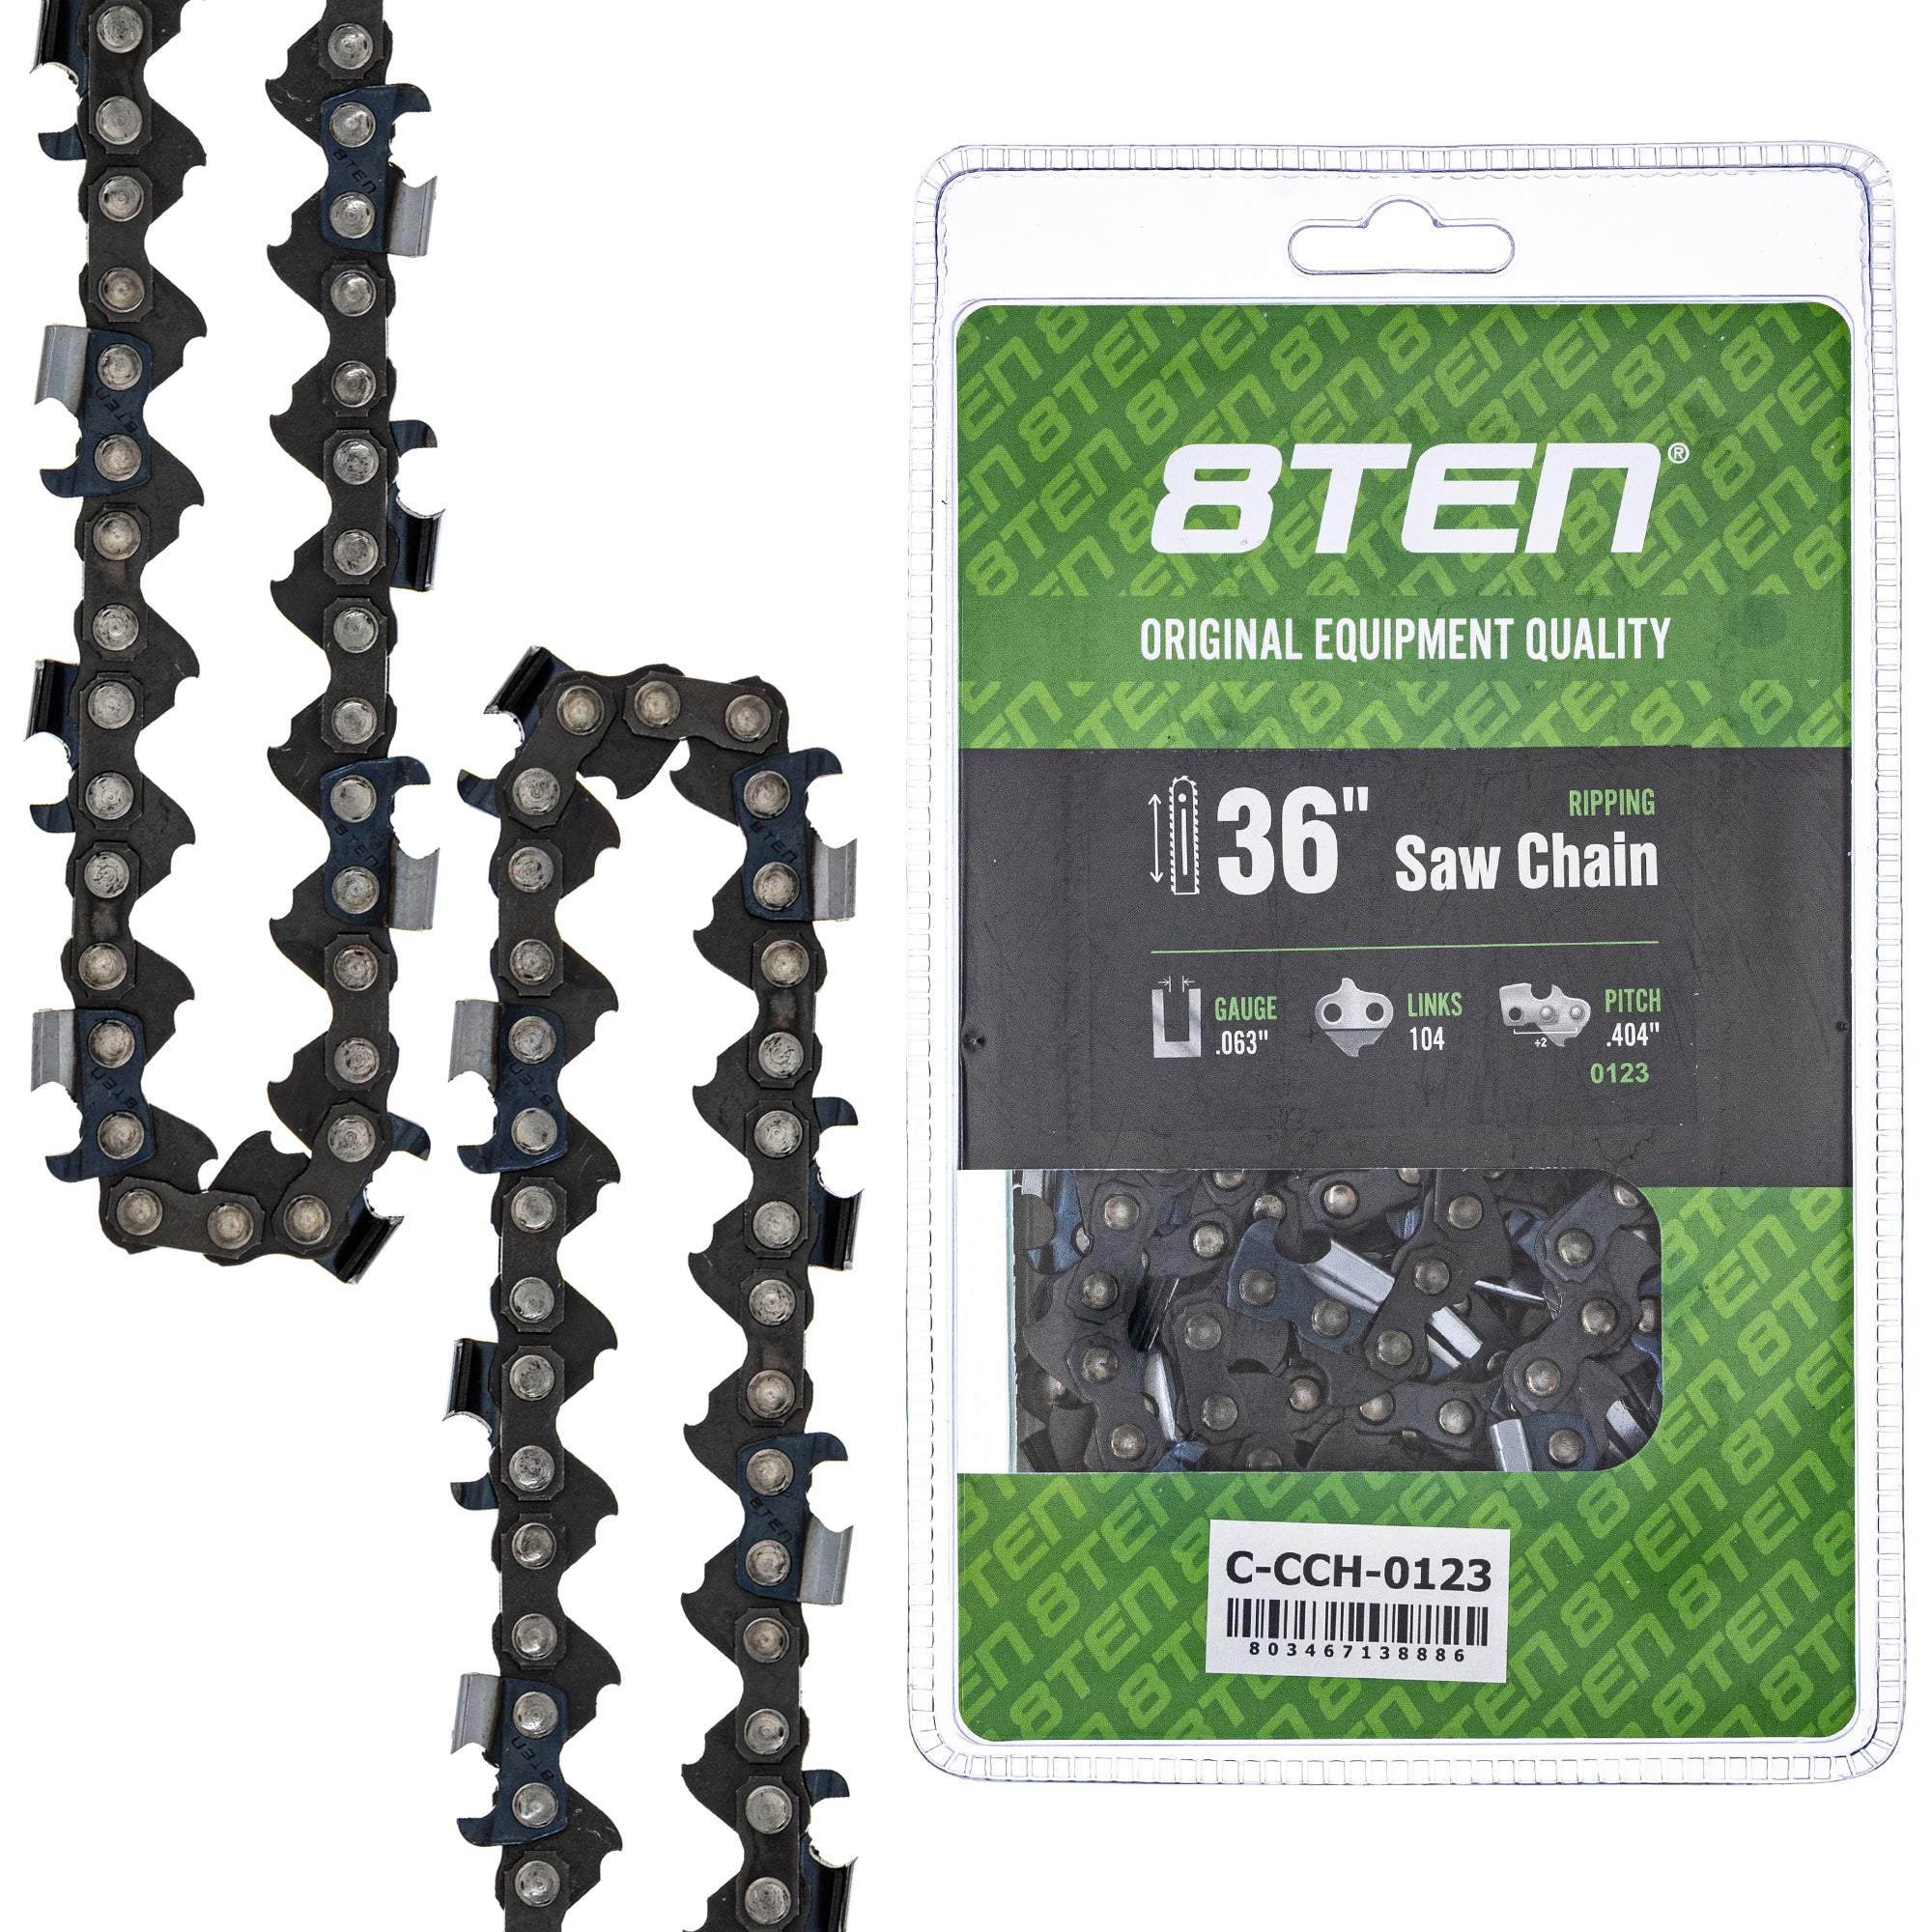 Chainsaw Chain 36 Inch .063 .404 104DL for zOTHER MS 090 088 084 8TEN 810-CCC2345H